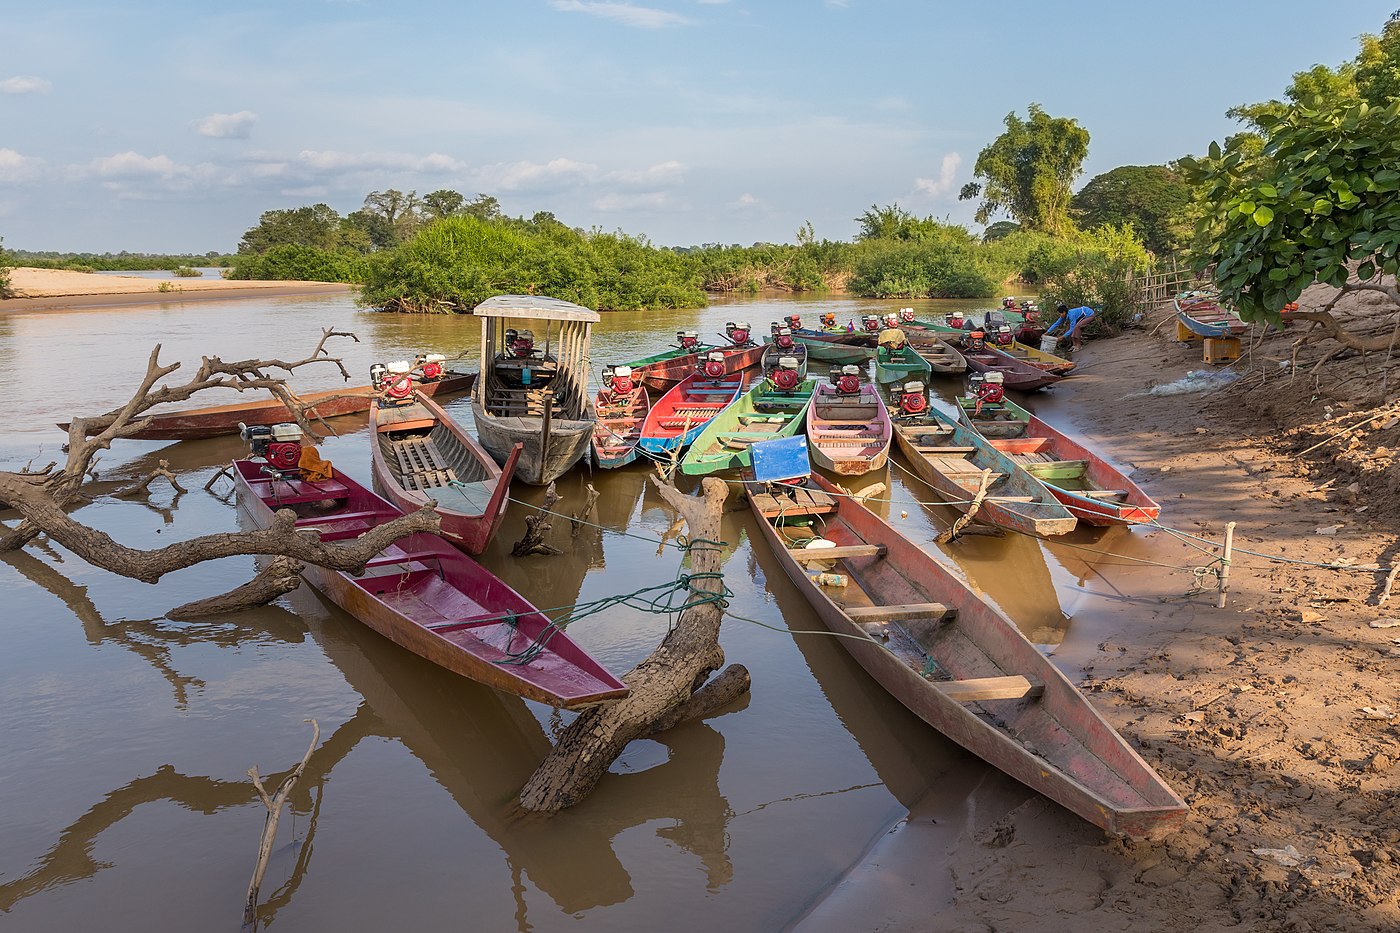 Group of pirogues at sunset on the river bank of the Mekong